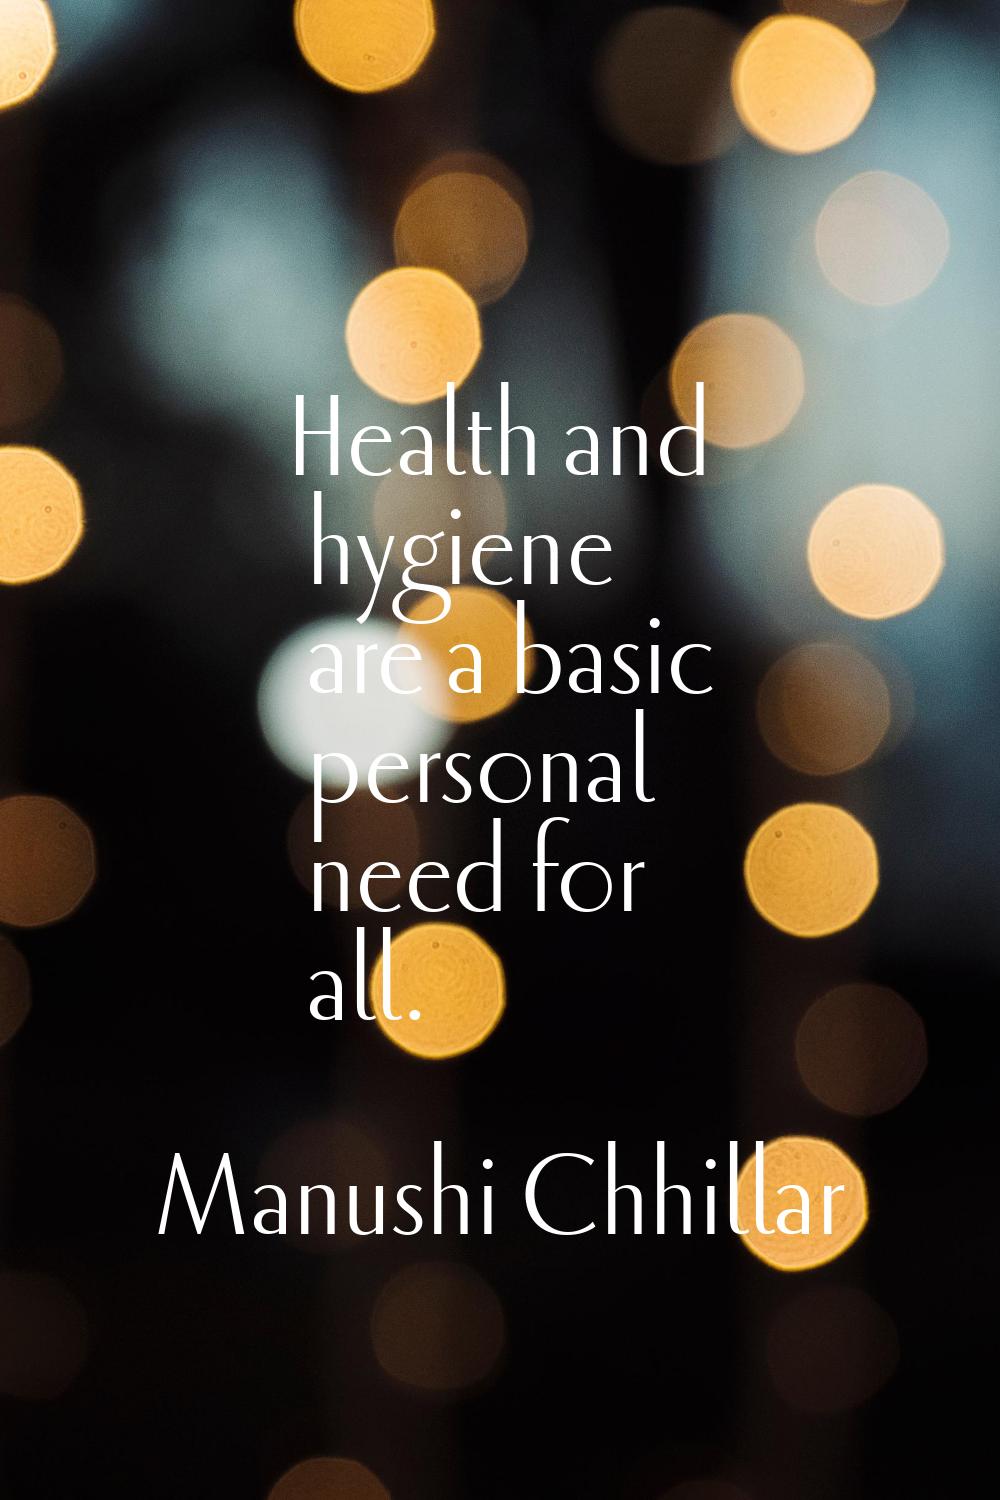 Health and hygiene are a basic personal need for all.